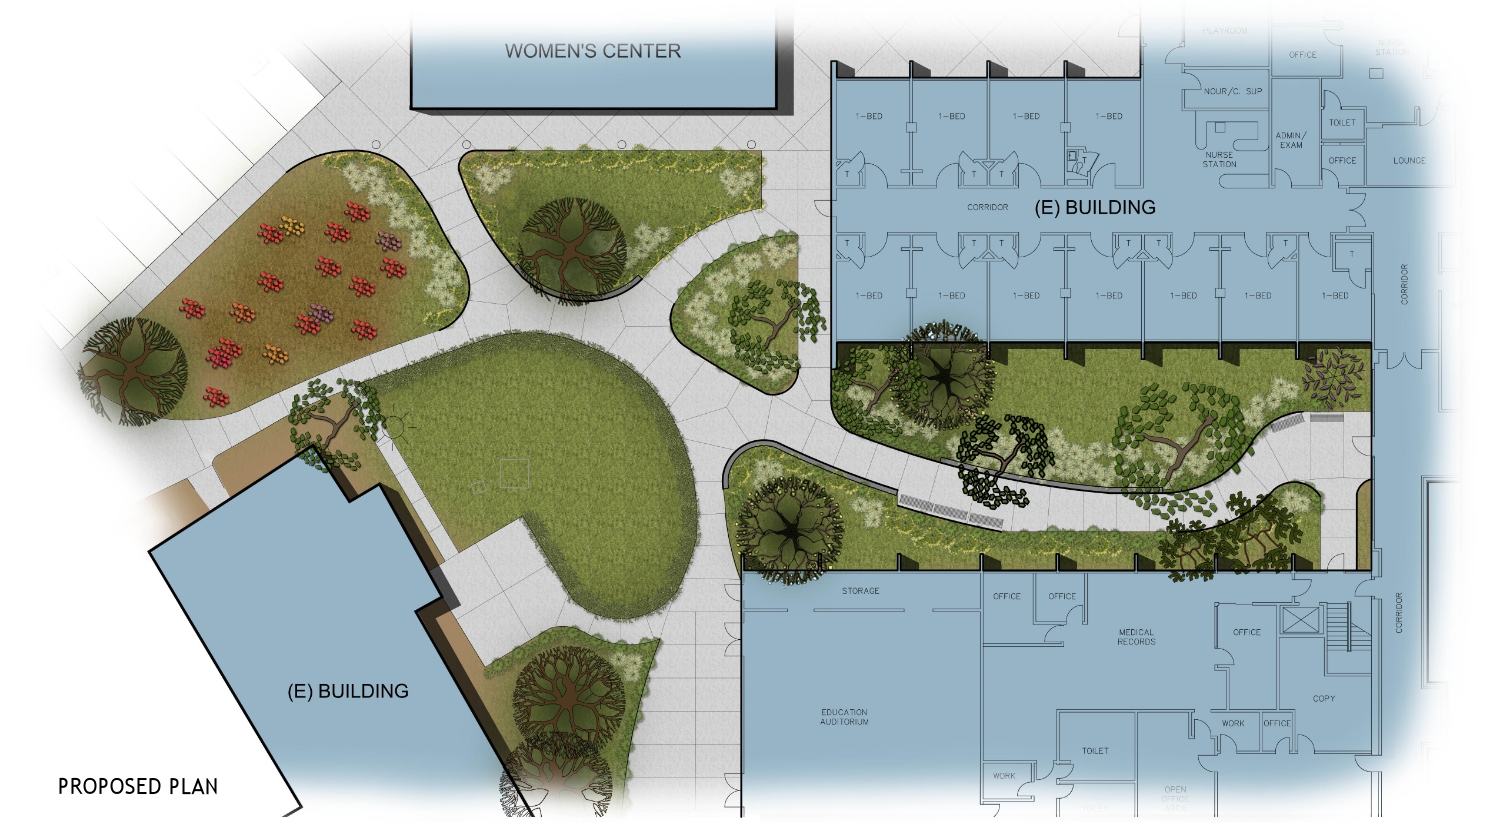 Womens Center Hardscape Replacement Plan 11x17 proposed (3)_no notes.jpg